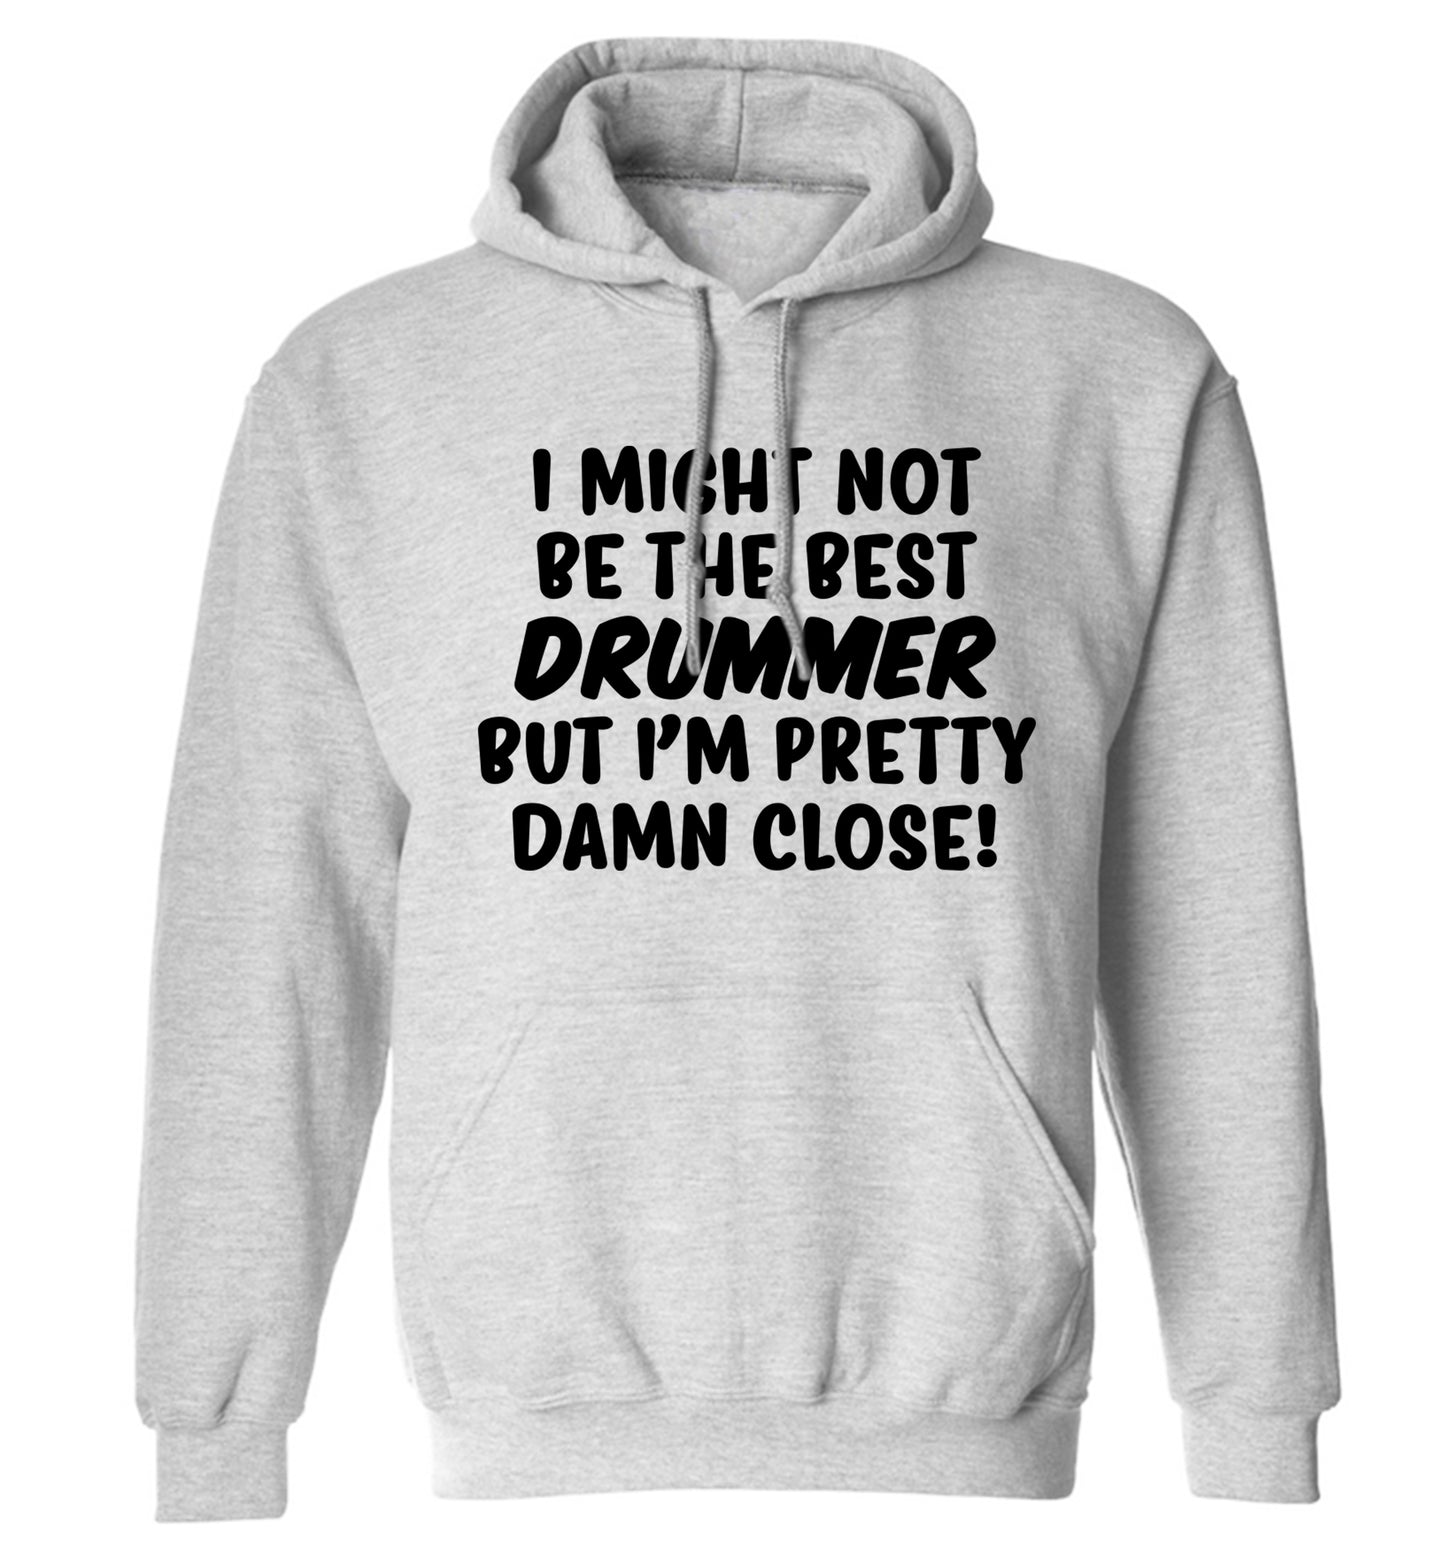 I might not be the best drummer but I'm pretty close! adults unisexgrey hoodie 2XL